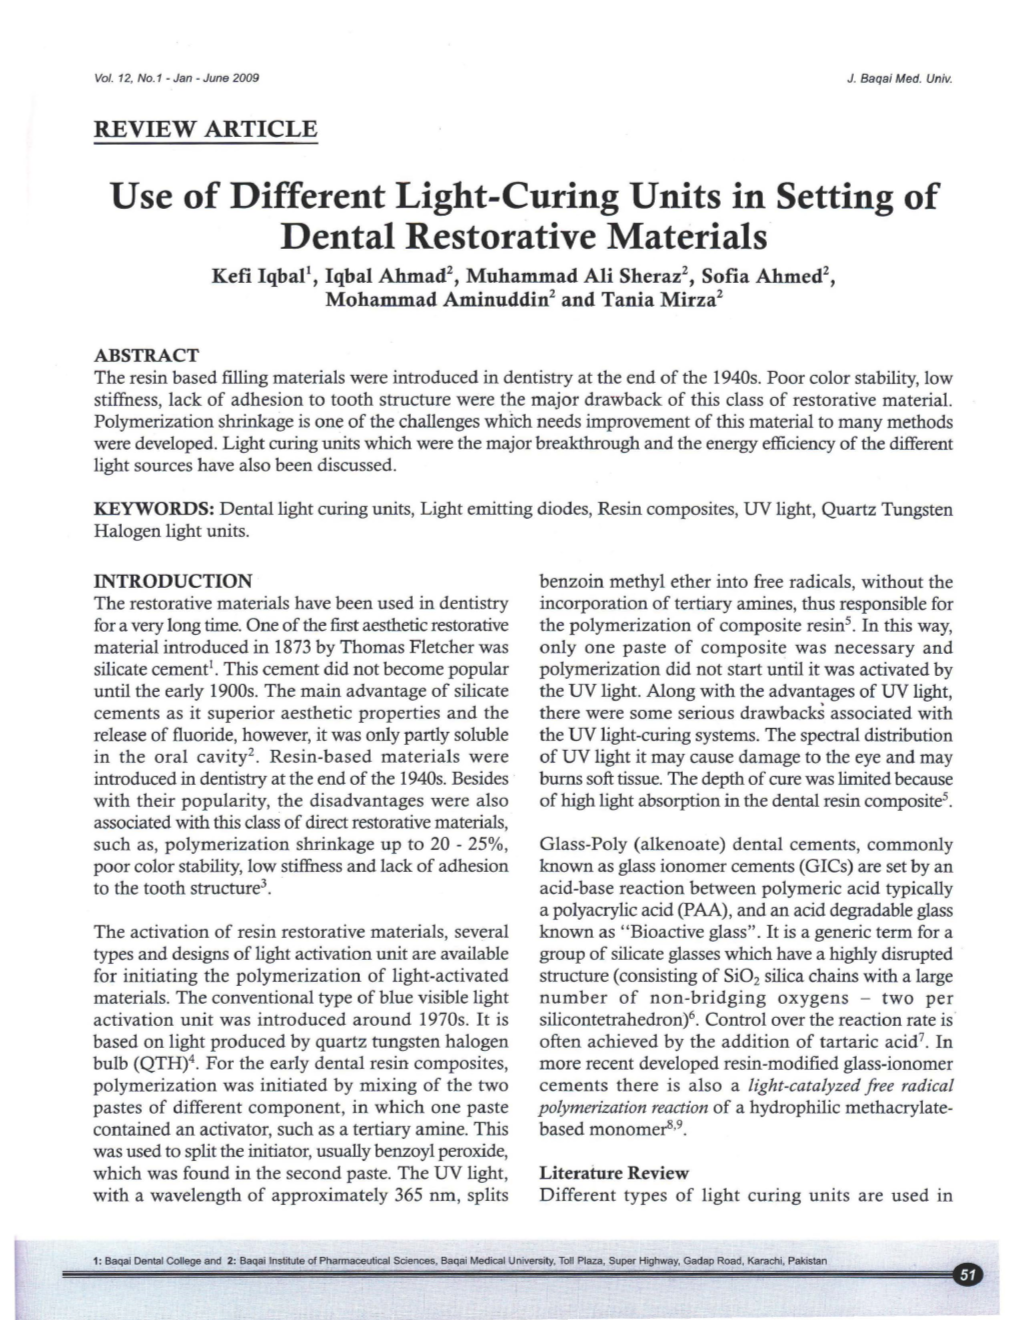 Use of Different Light-Curing Units in Setting of Dental Restorative